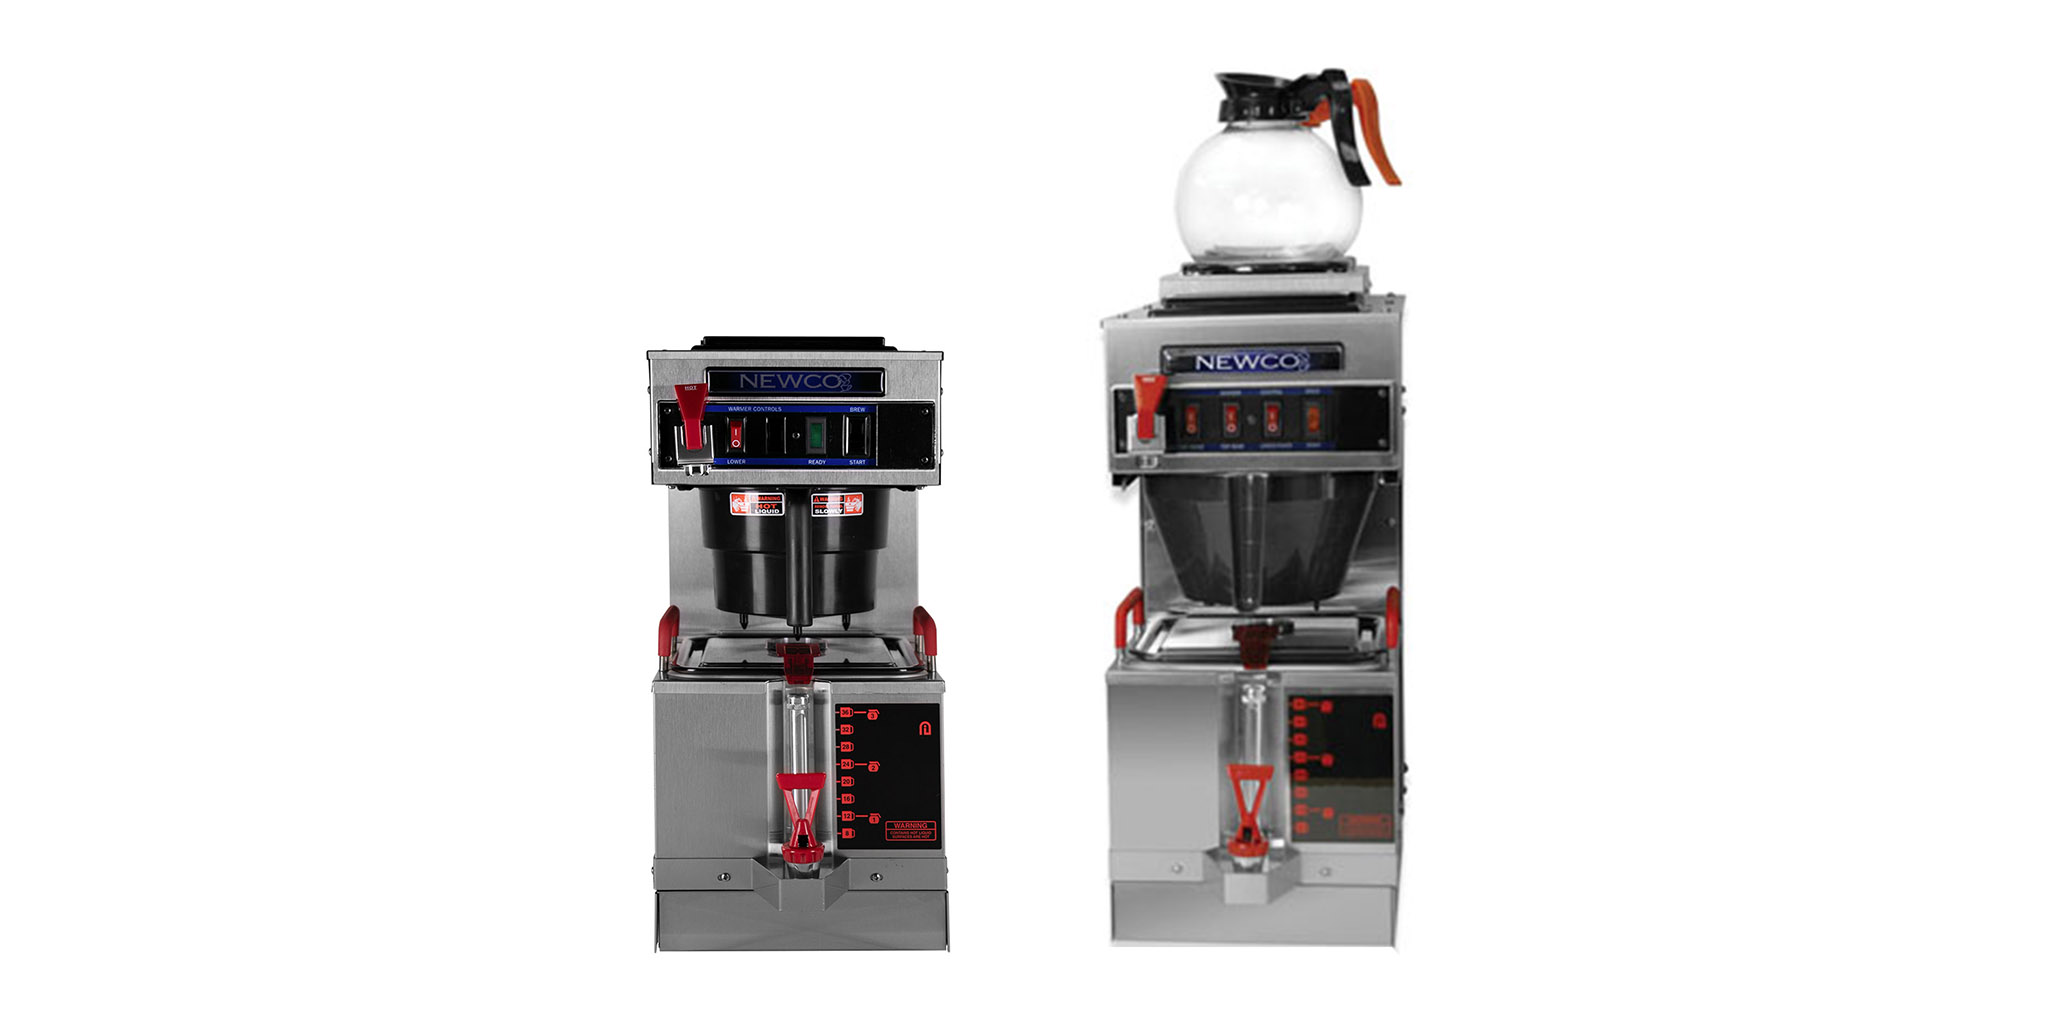 20:1 LD - Combo Brewer  Newco Tea and Coffee Brewer